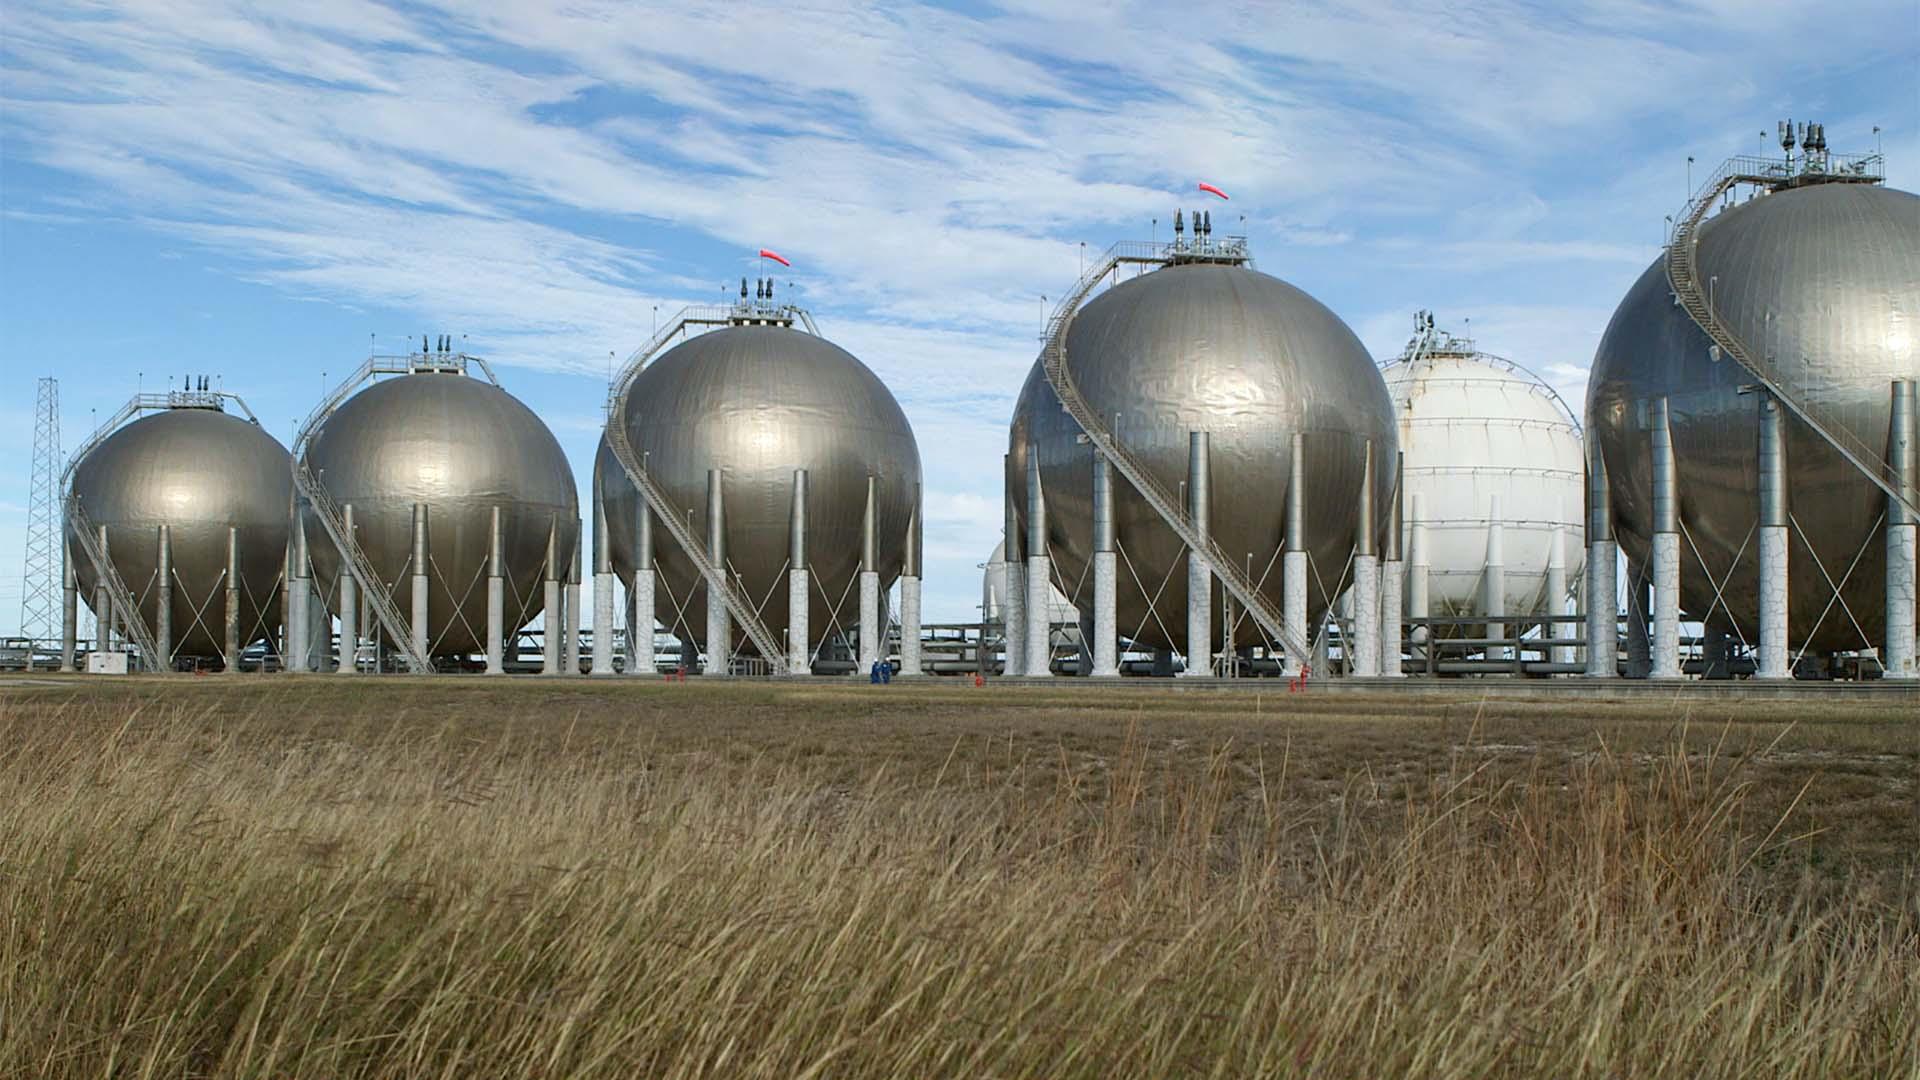 Row of spheres at OxyChem Ingleside Plant